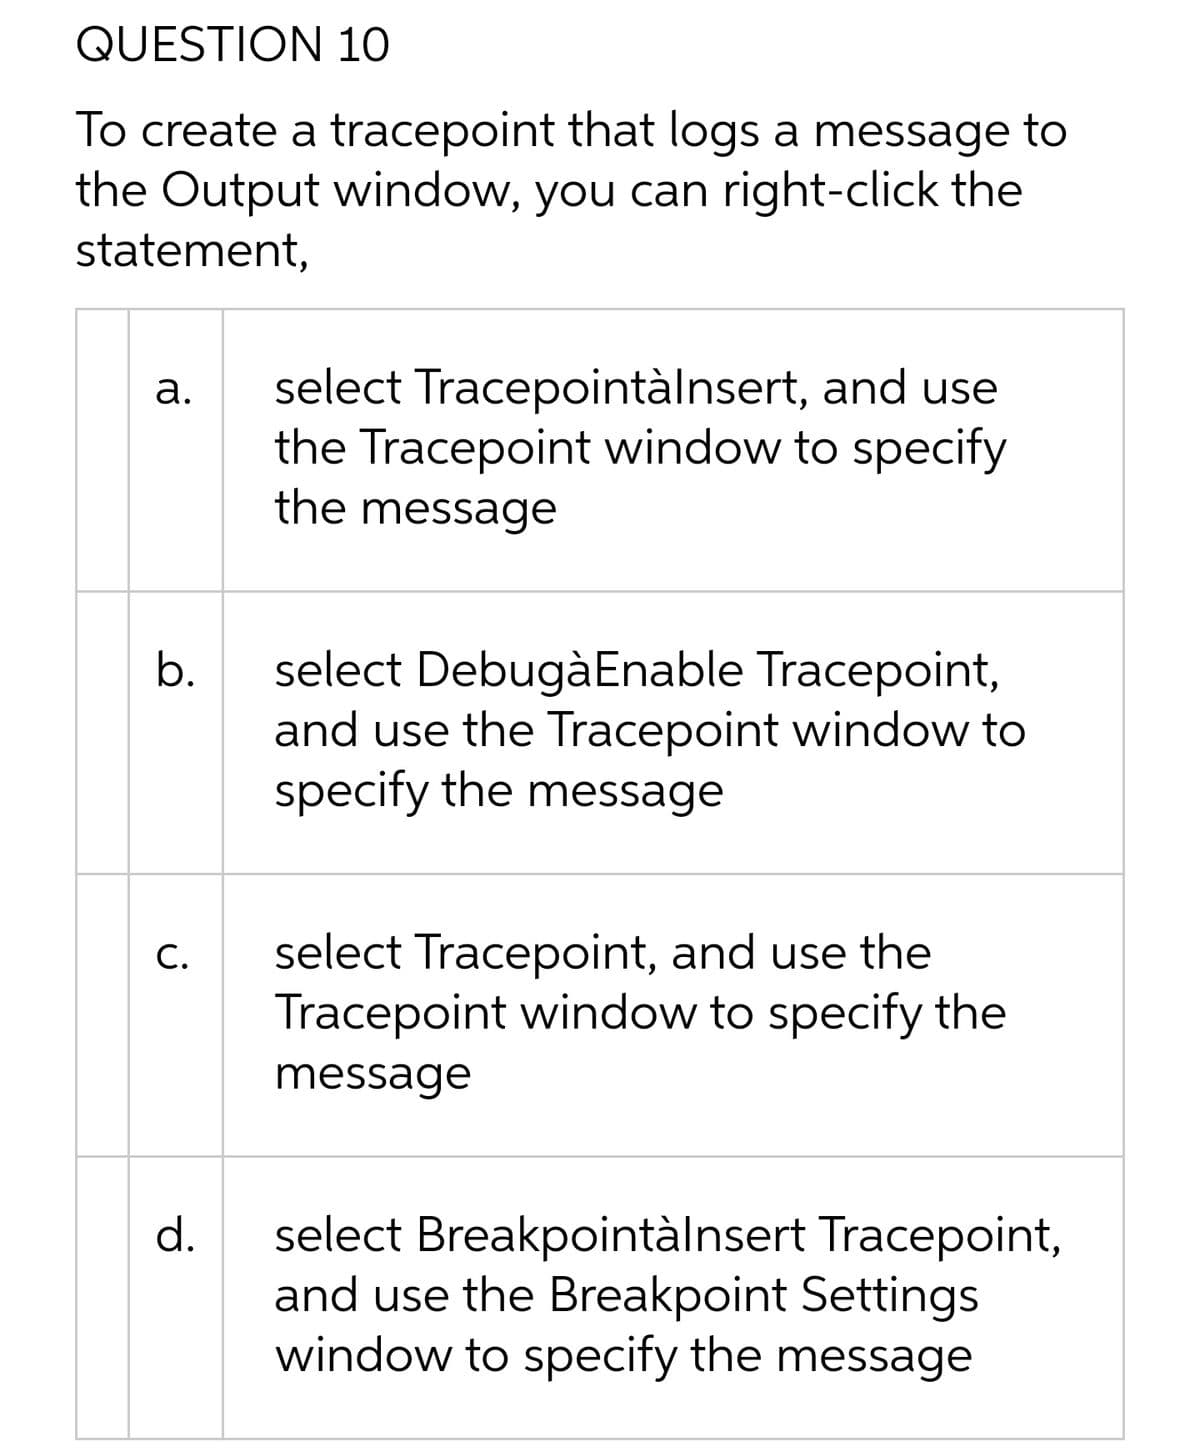 QUESTION 10
To create a tracepoint that logs a message to
the Output window, you can right-click the
statement,
select Tracepointàlnsert, and use
the Tracepoint window to specify
the message
а.
select DebugàEnable Tracepoint,
and use the Tracepoint window to
specify the message
b.
select Tracepoint, and use the
Tracepoint window to specify the
С.
message
select Breakpointàlnsert Tracepoint,
and use the Breakpoint Settings
window to specify the message
d.
